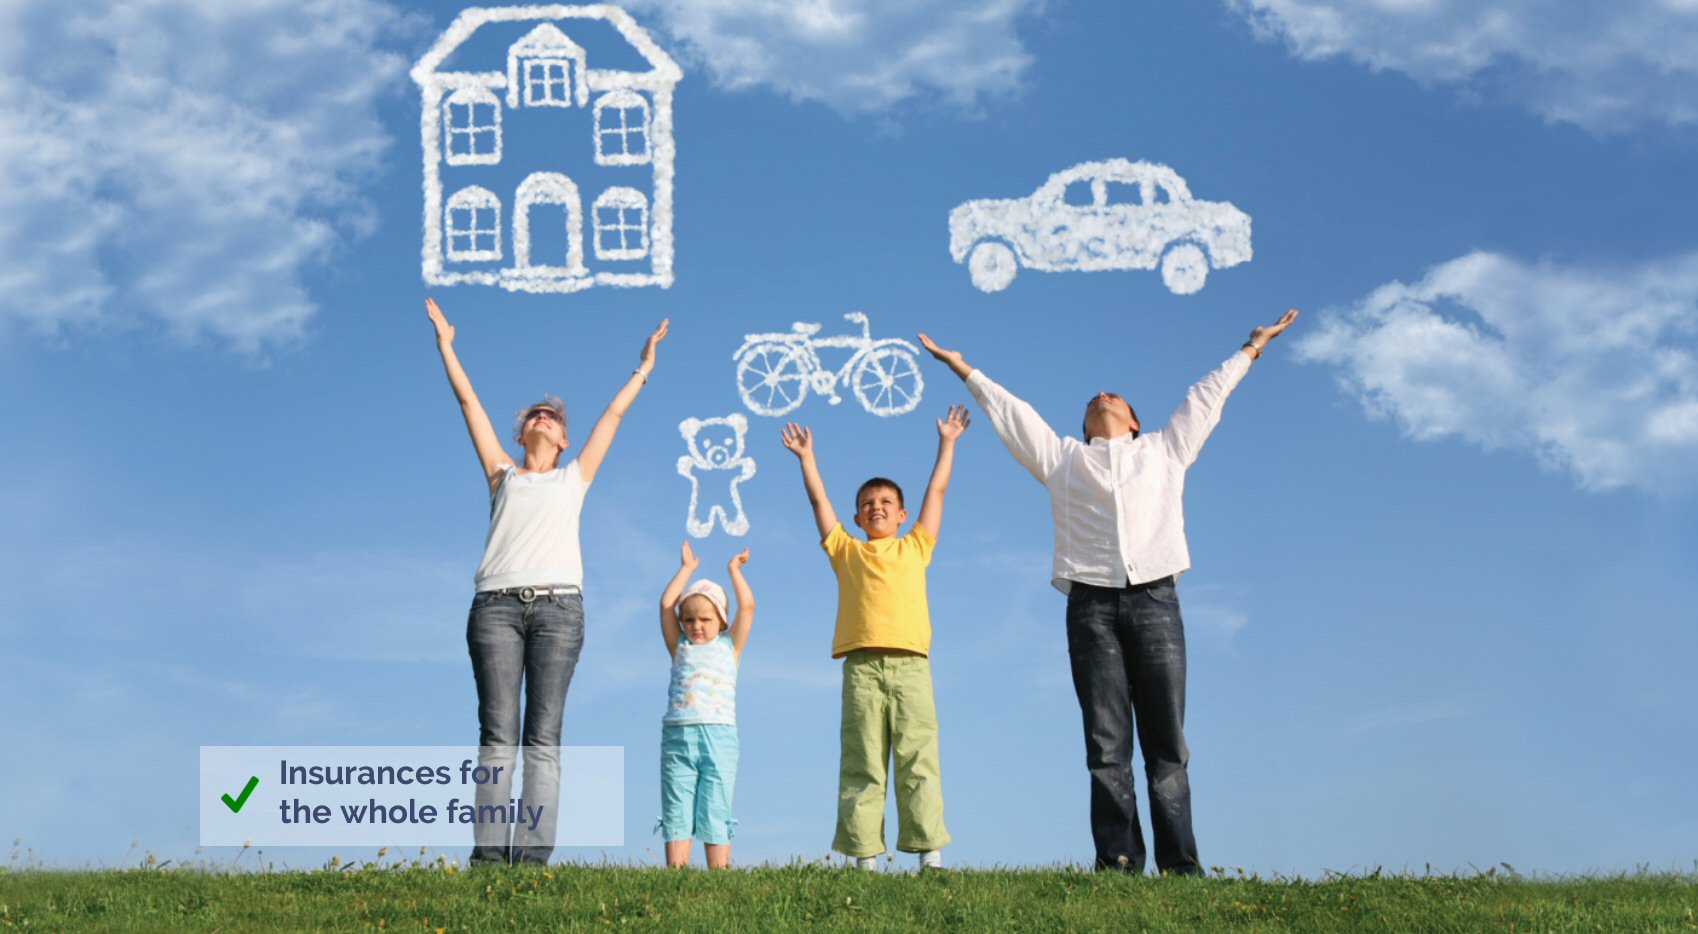 Insurances in Spain for the whole family